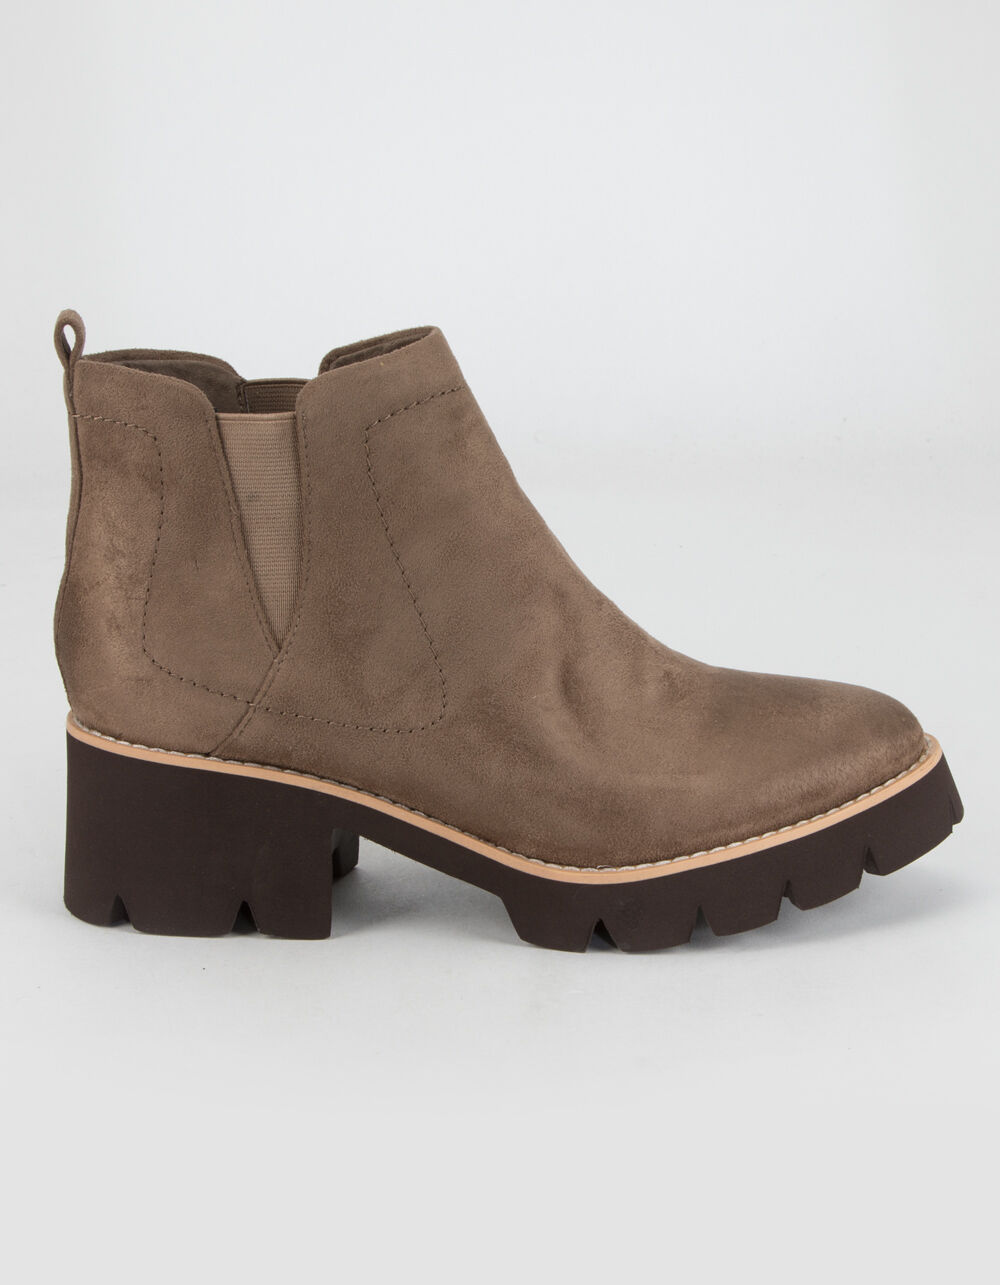 BC FOOTWEAR Fight For Your Right Womens Boots - TAUPE | Tillys